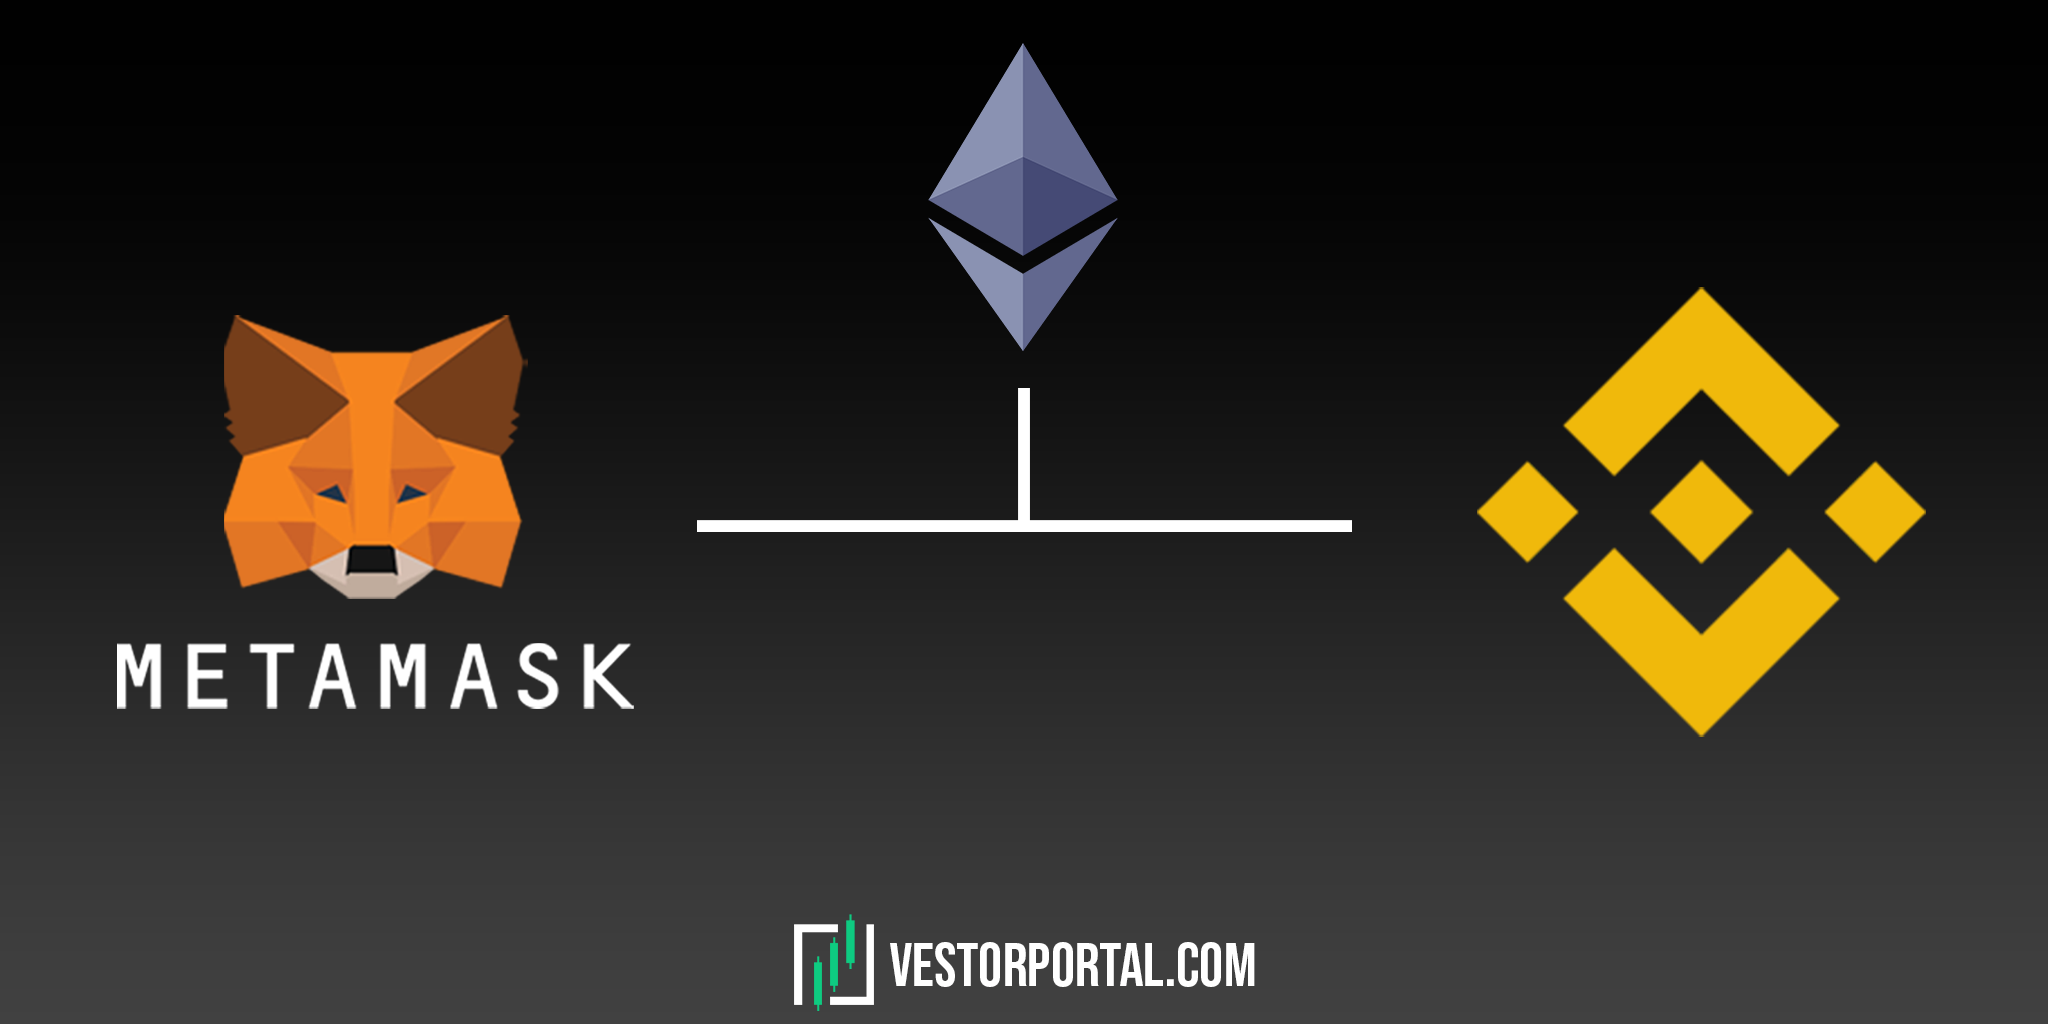 How to deposit ETH from MetaMask to Binance?